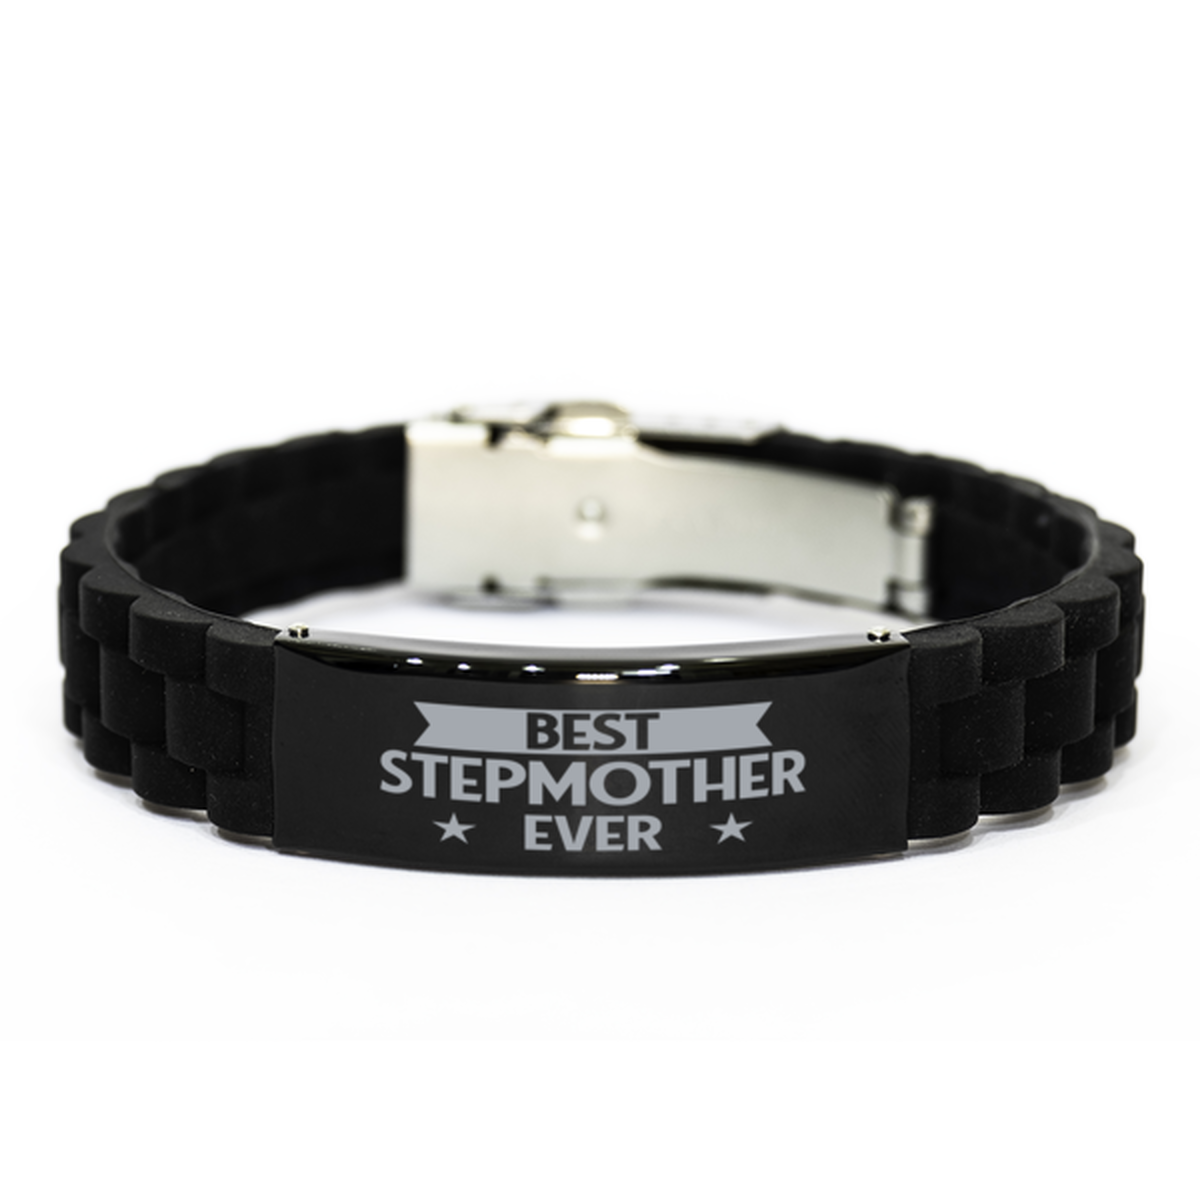 Best Stepmother Ever Stepmother Gifts, Funny Black Engraved Bracelet For Stepmother, Family Gifts For Women